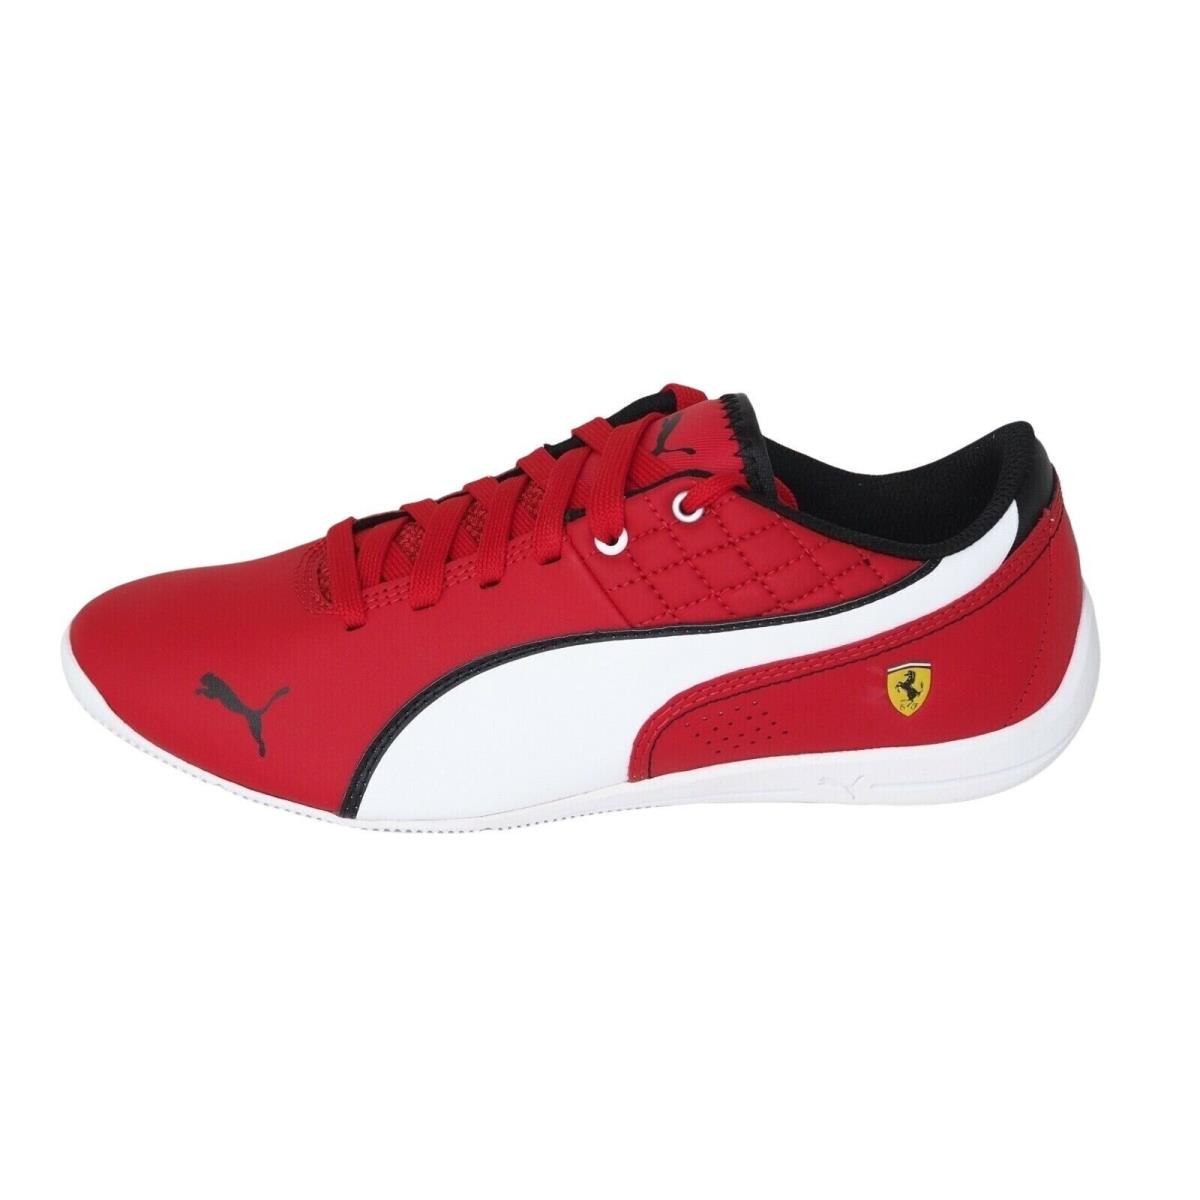 Puma Drift Cat 6 L NM SF Boys Shoes Leather Sneakers 358775 03 Red SZ 6.5 Casual